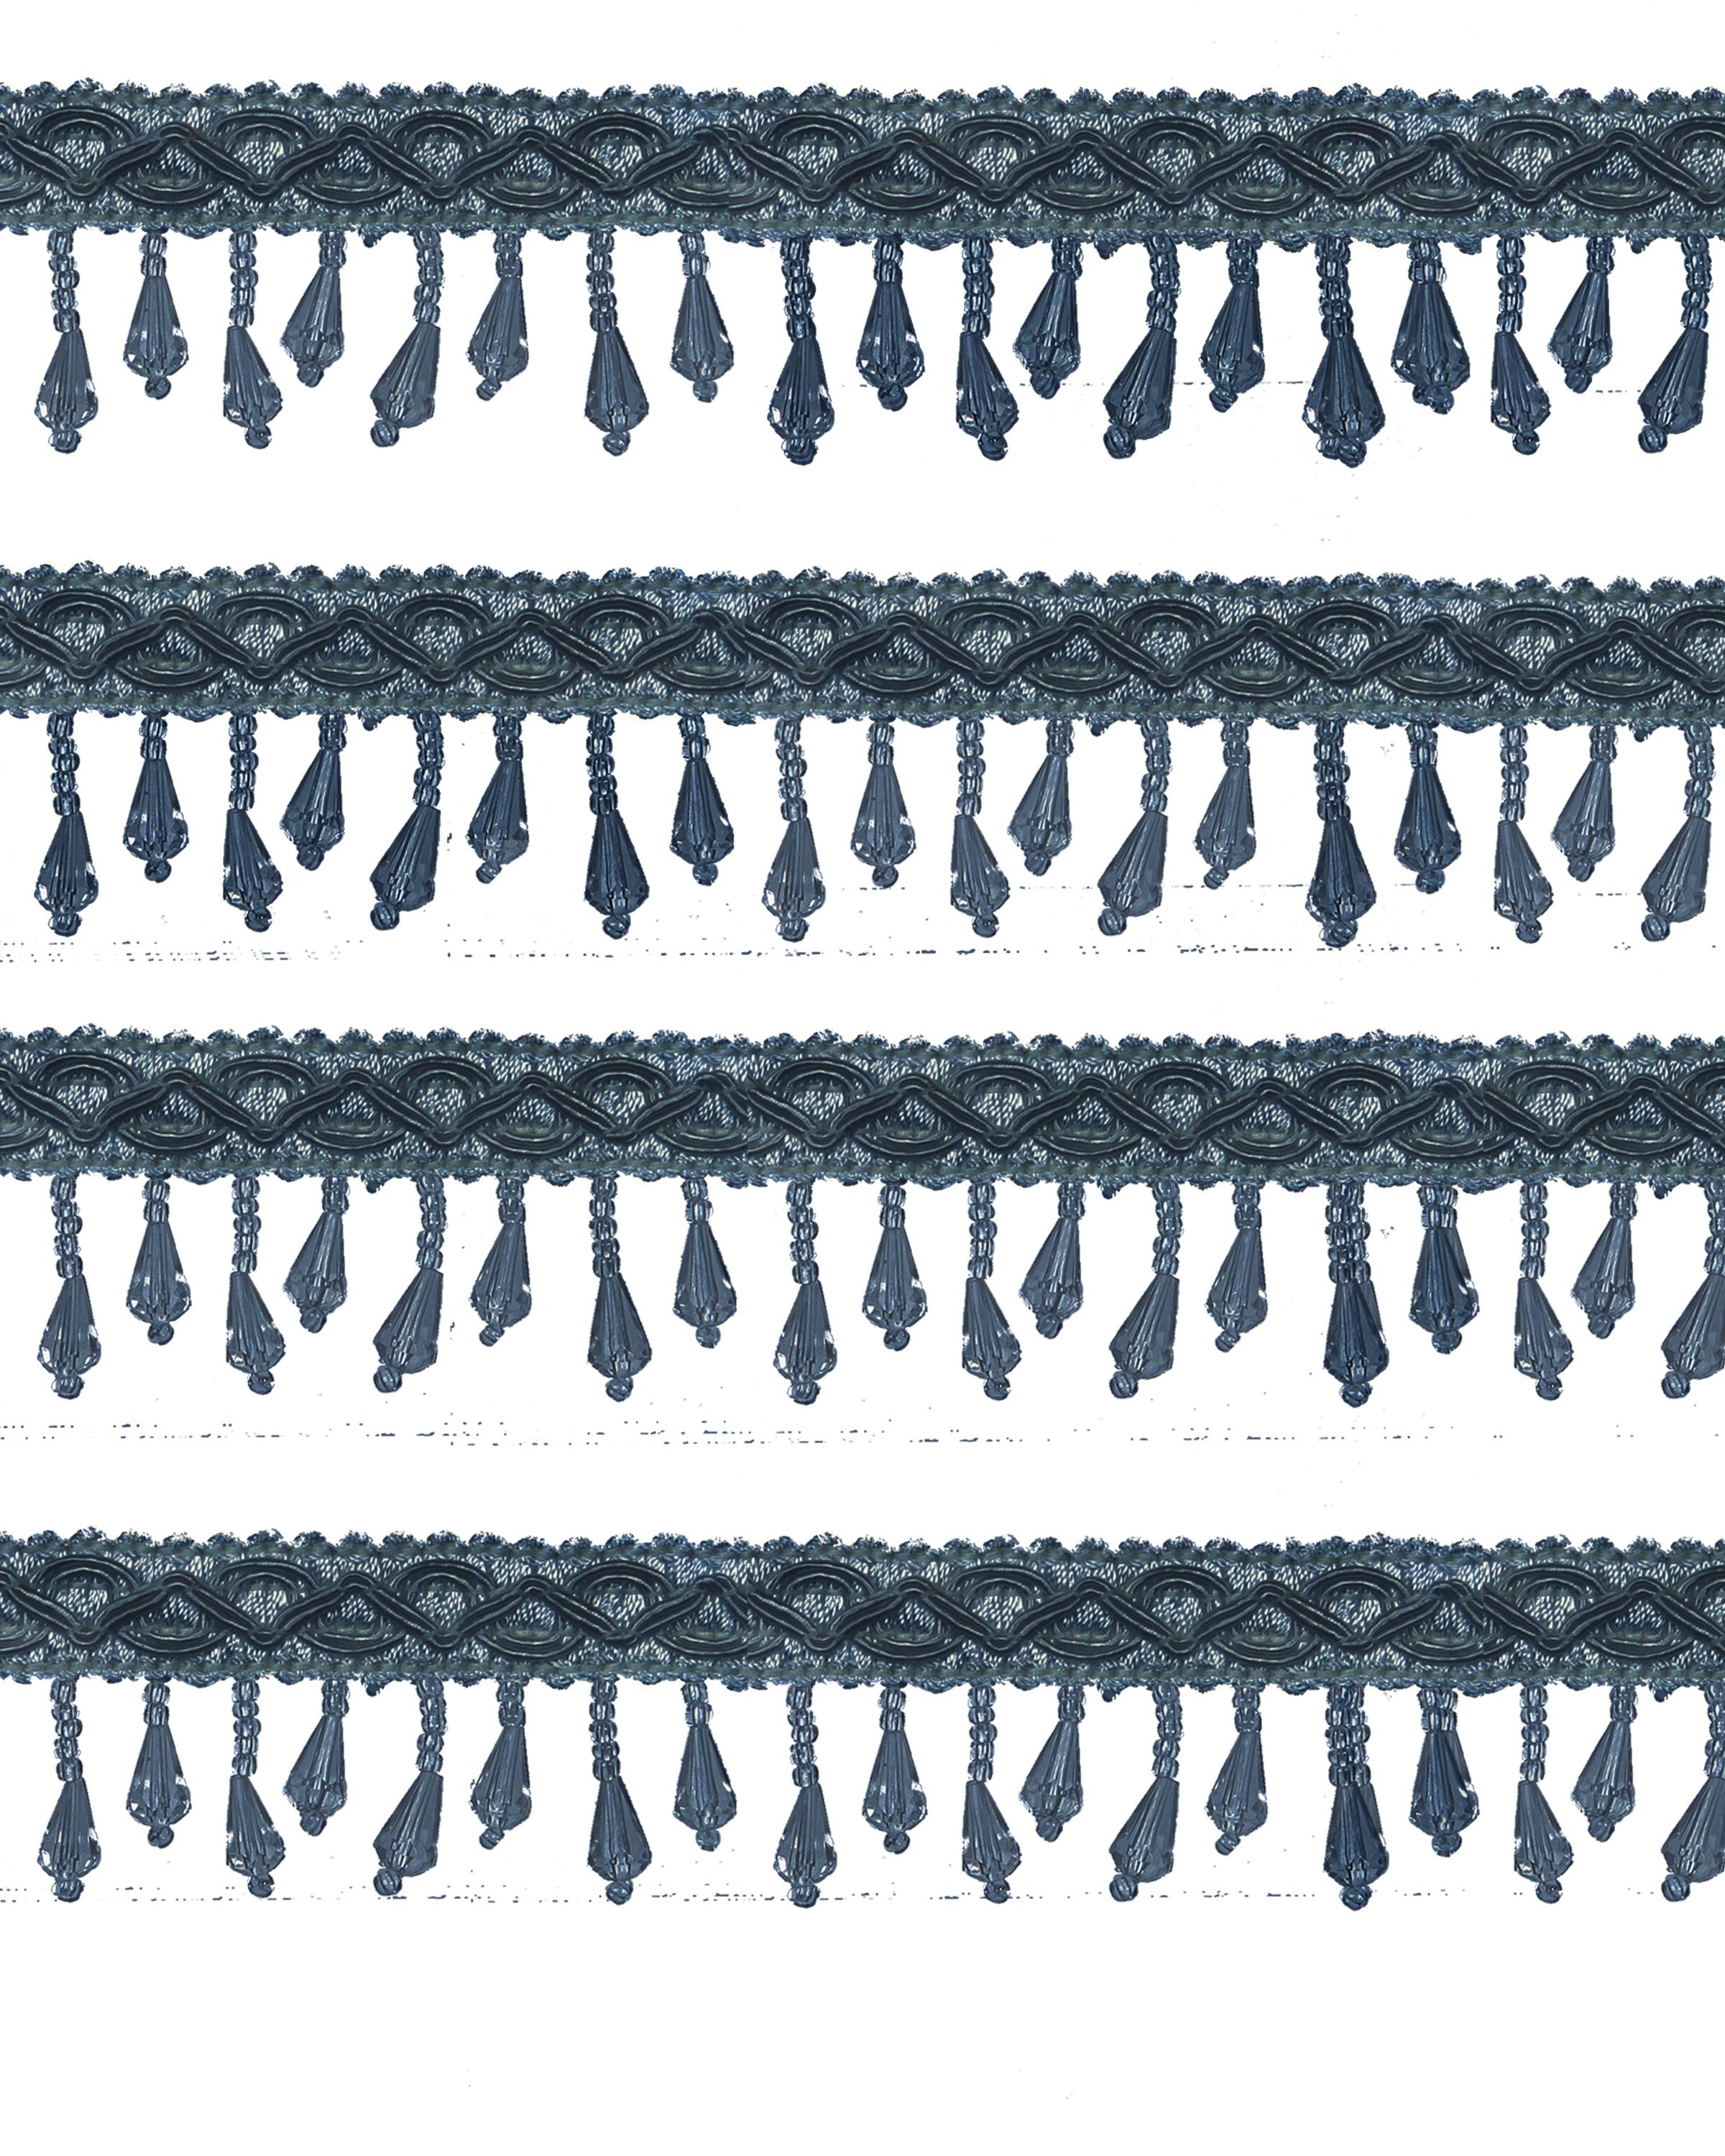 Short Fringe Beading - Charcoal Grey 40mm Price is for 5 metres